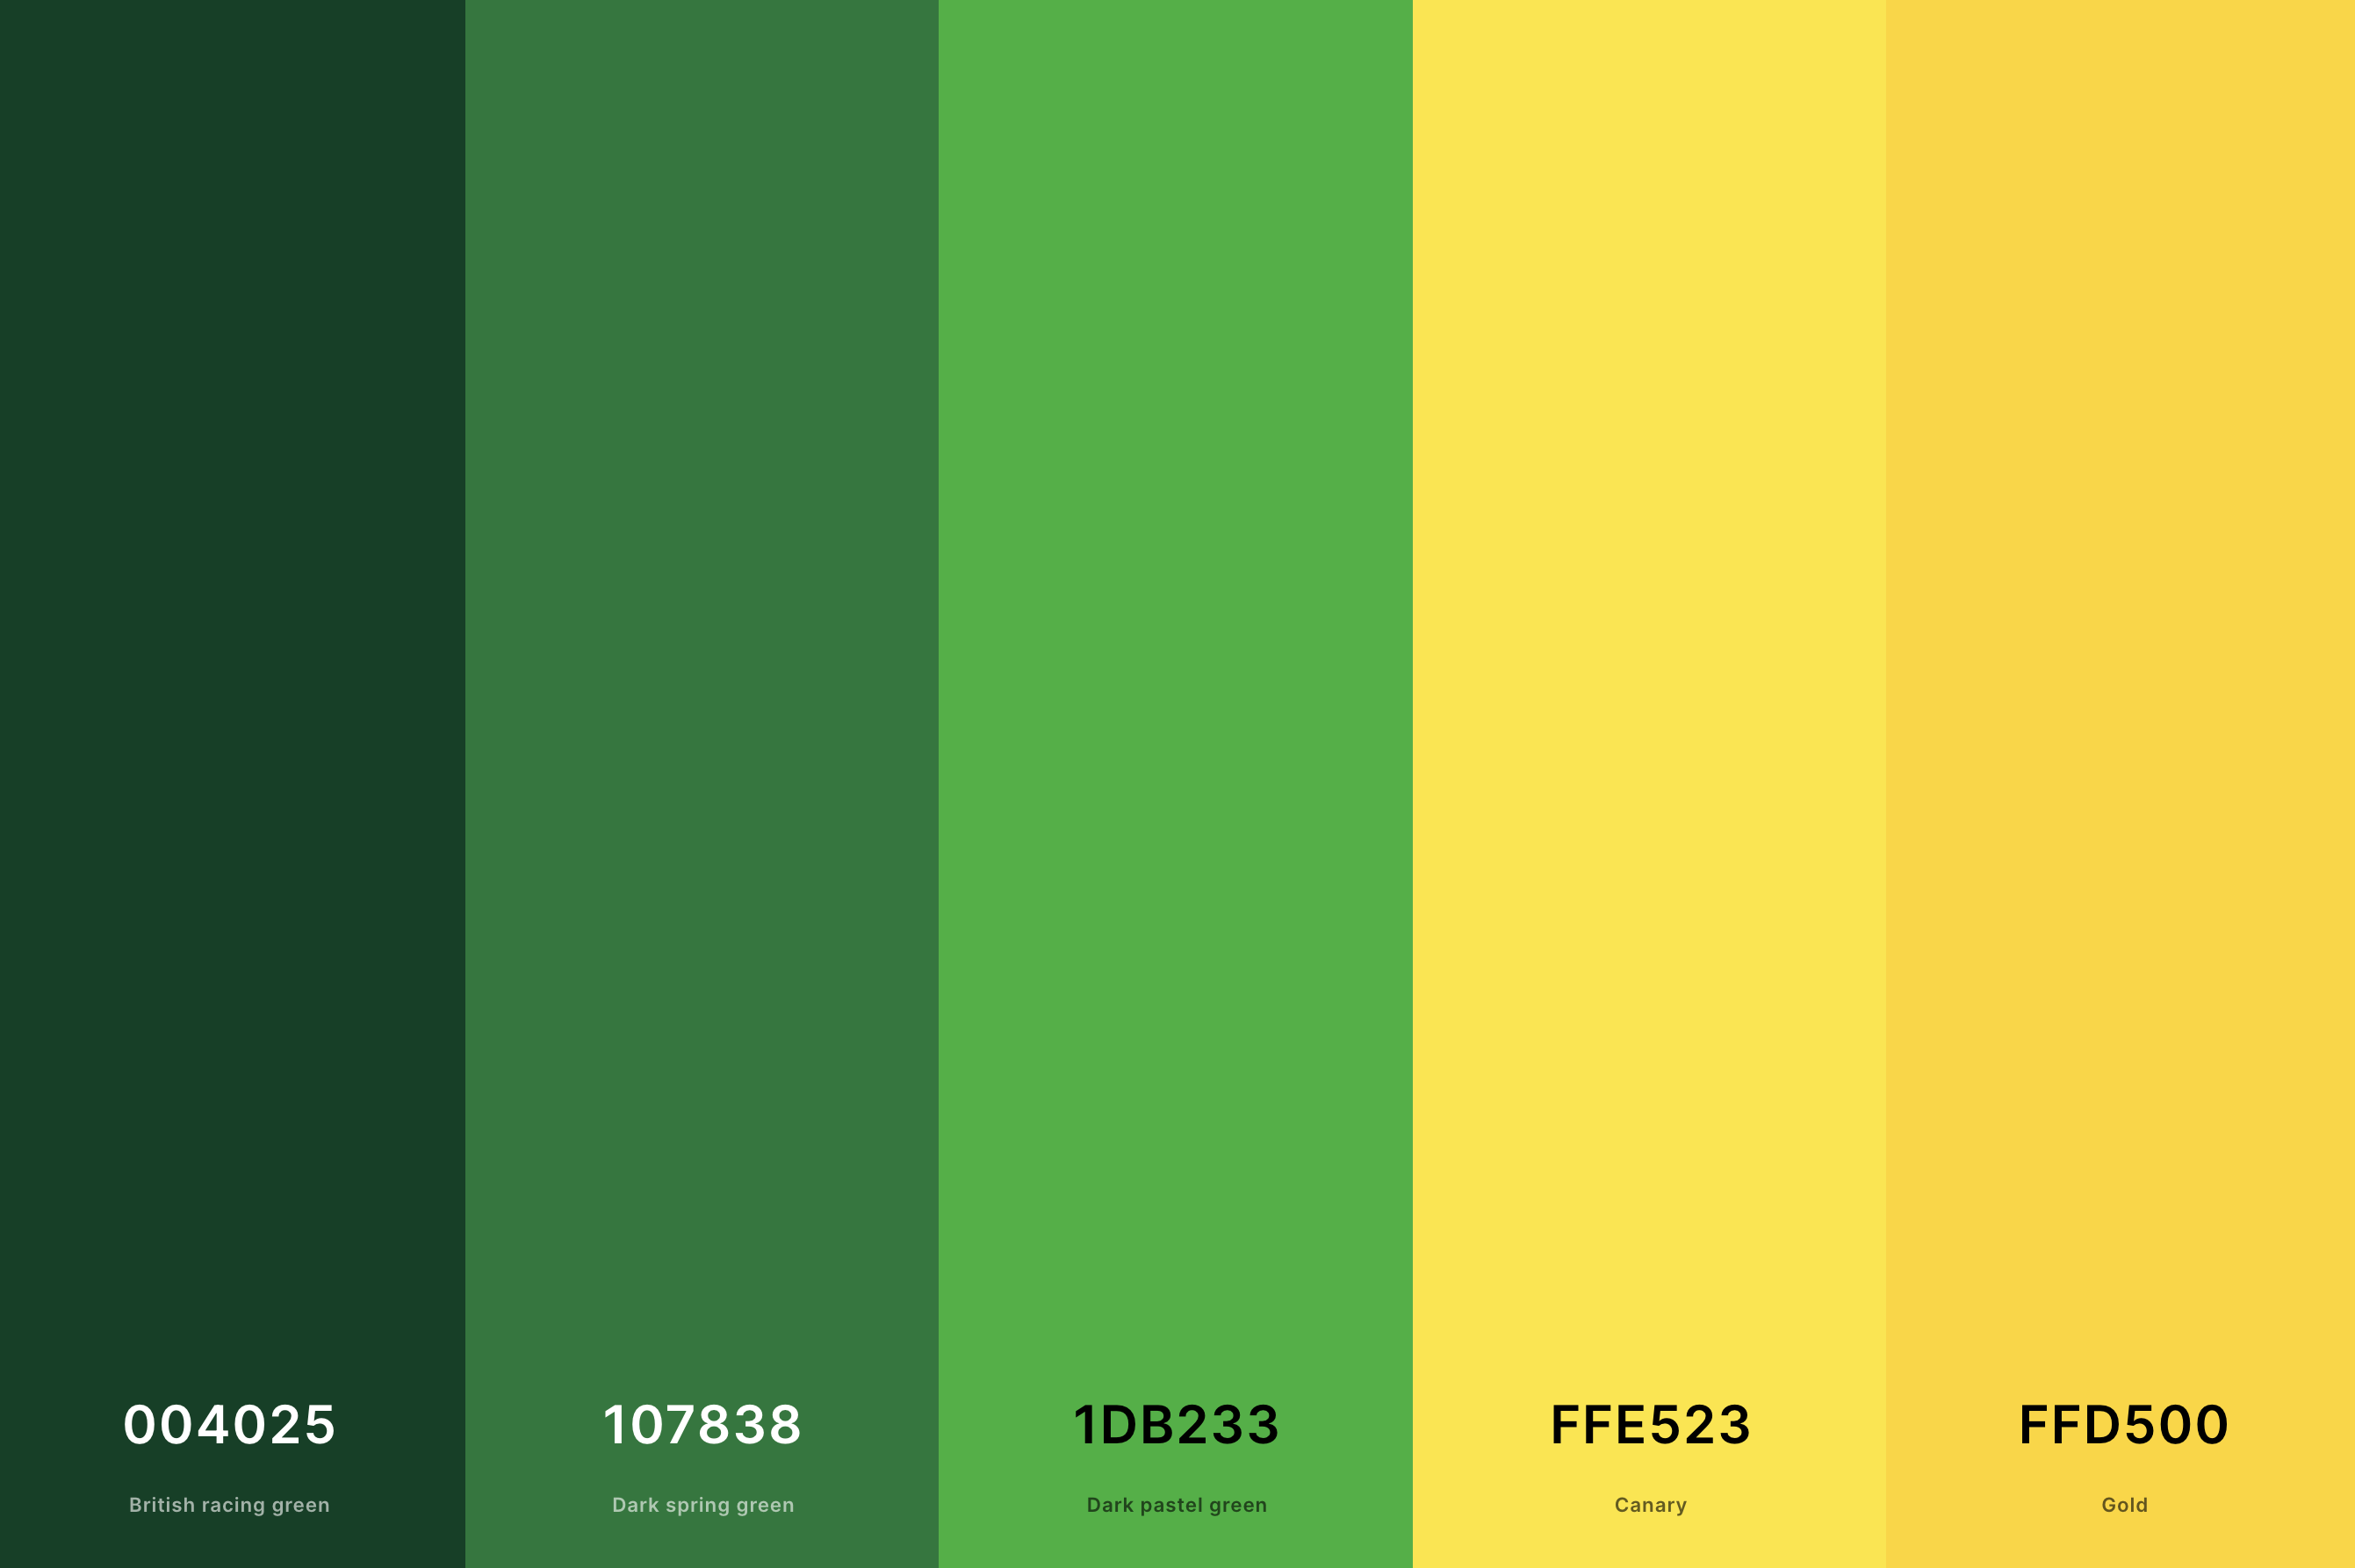 2. Green And Yellow Color Palette Color Palette with British Racing Green (Hex #004025) + Dark Spring Green (Hex #107838) + Dark Pastel Green (Hex #1DB233) + Canary (Hex #FFE523) + Gold (Hex #FFD500) Color Palette with Hex Codes